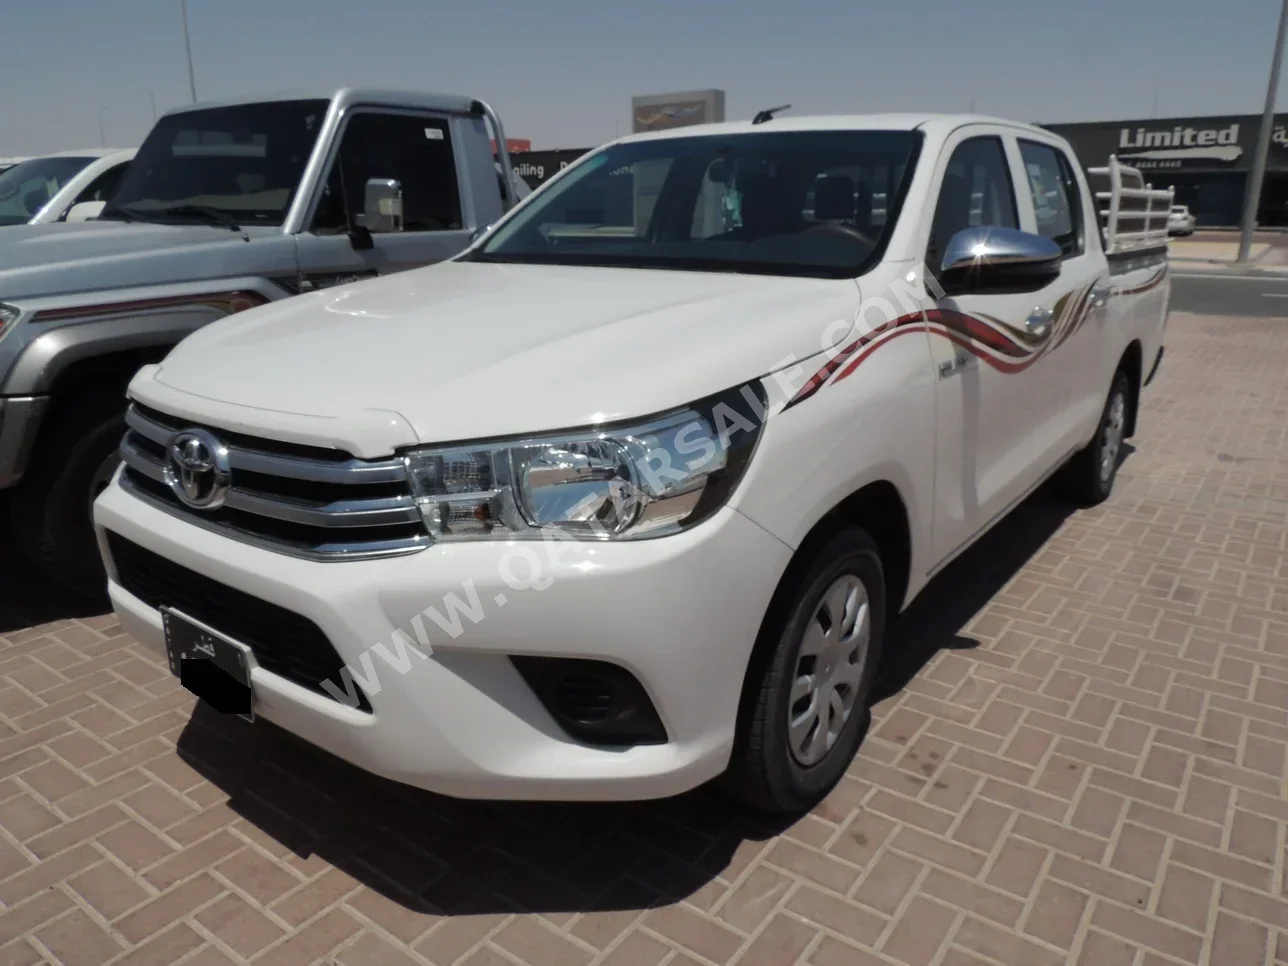 Toyota  Hilux  2021  Manual  110,000 Km  4 Cylinder  Four Wheel Drive (4WD)  Pick Up  White